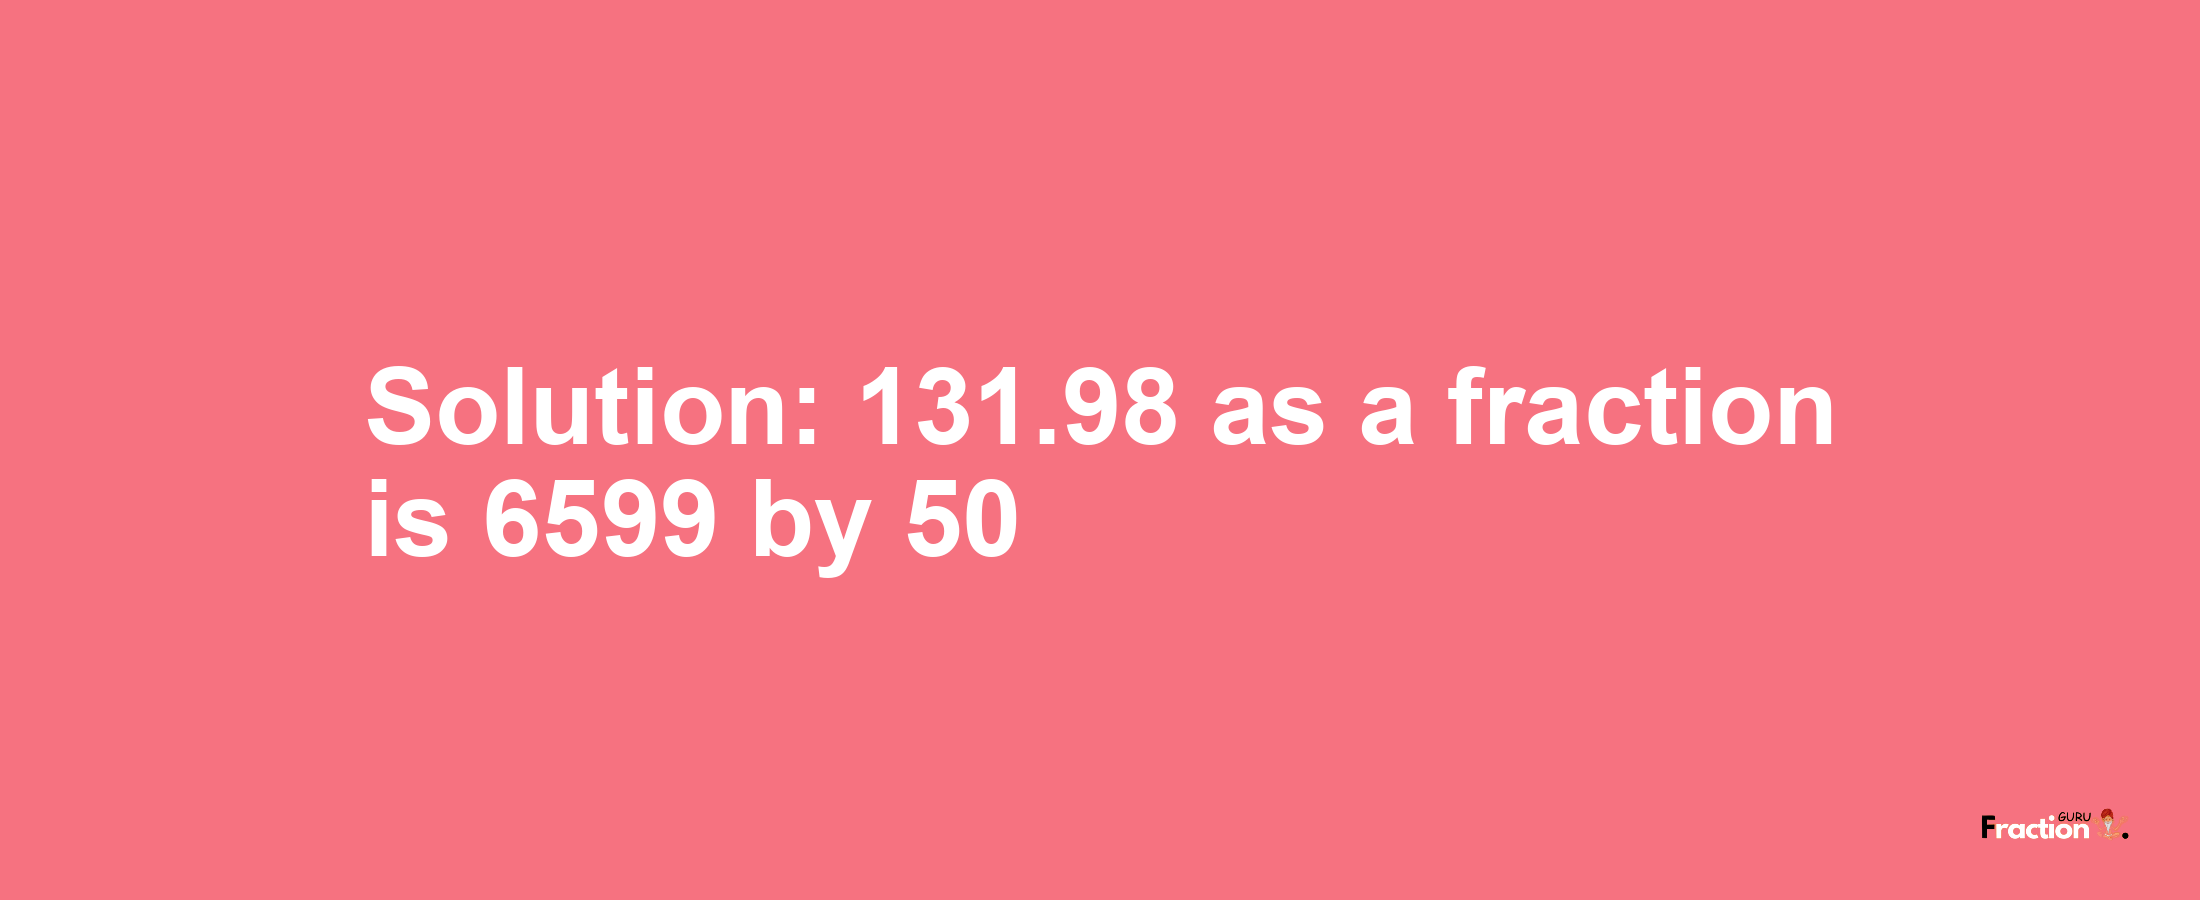 Solution:131.98 as a fraction is 6599/50